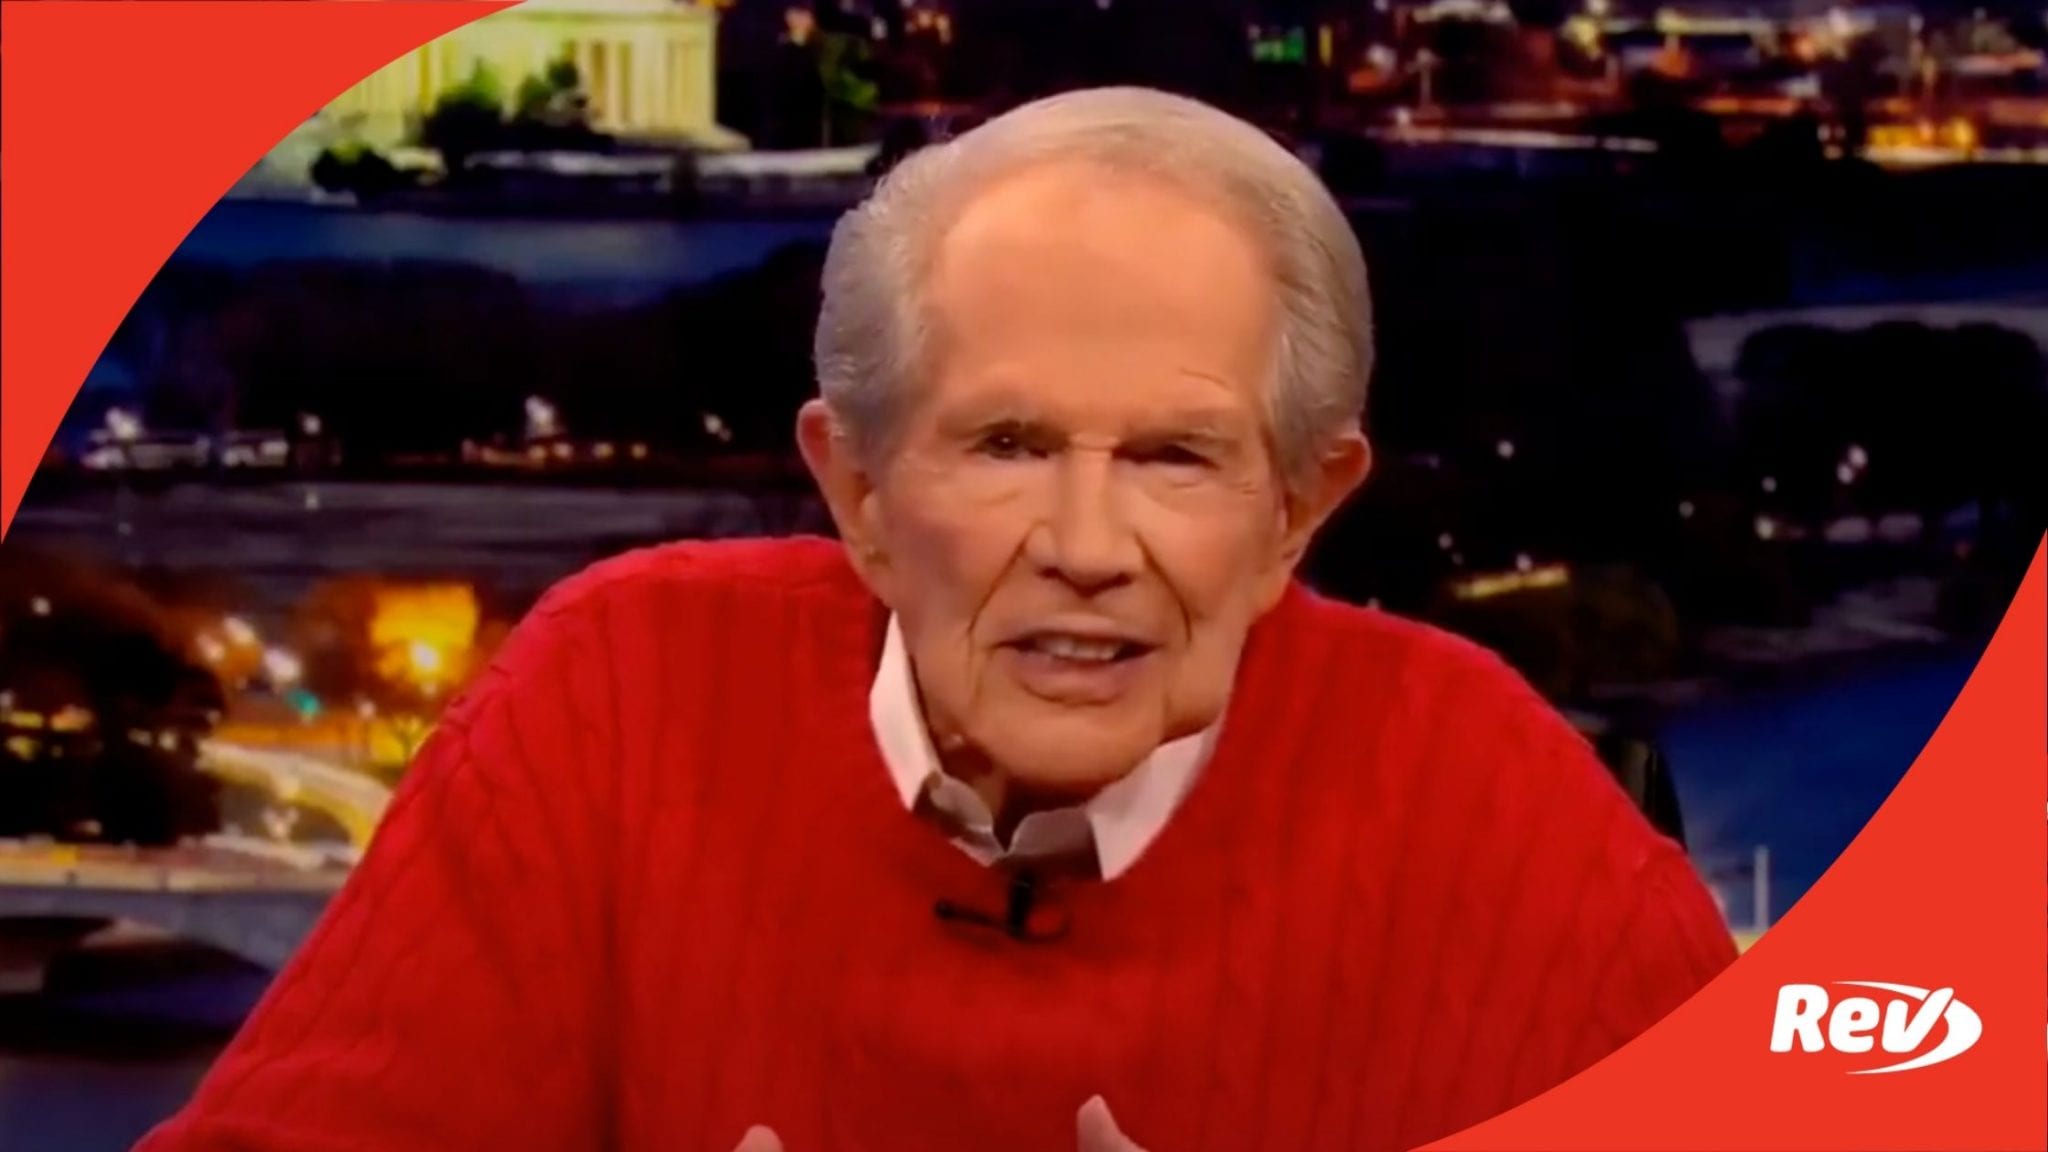 Pat Robertson Speech on Police Transcript: Chauvin Should Be Put "Under the Jail"